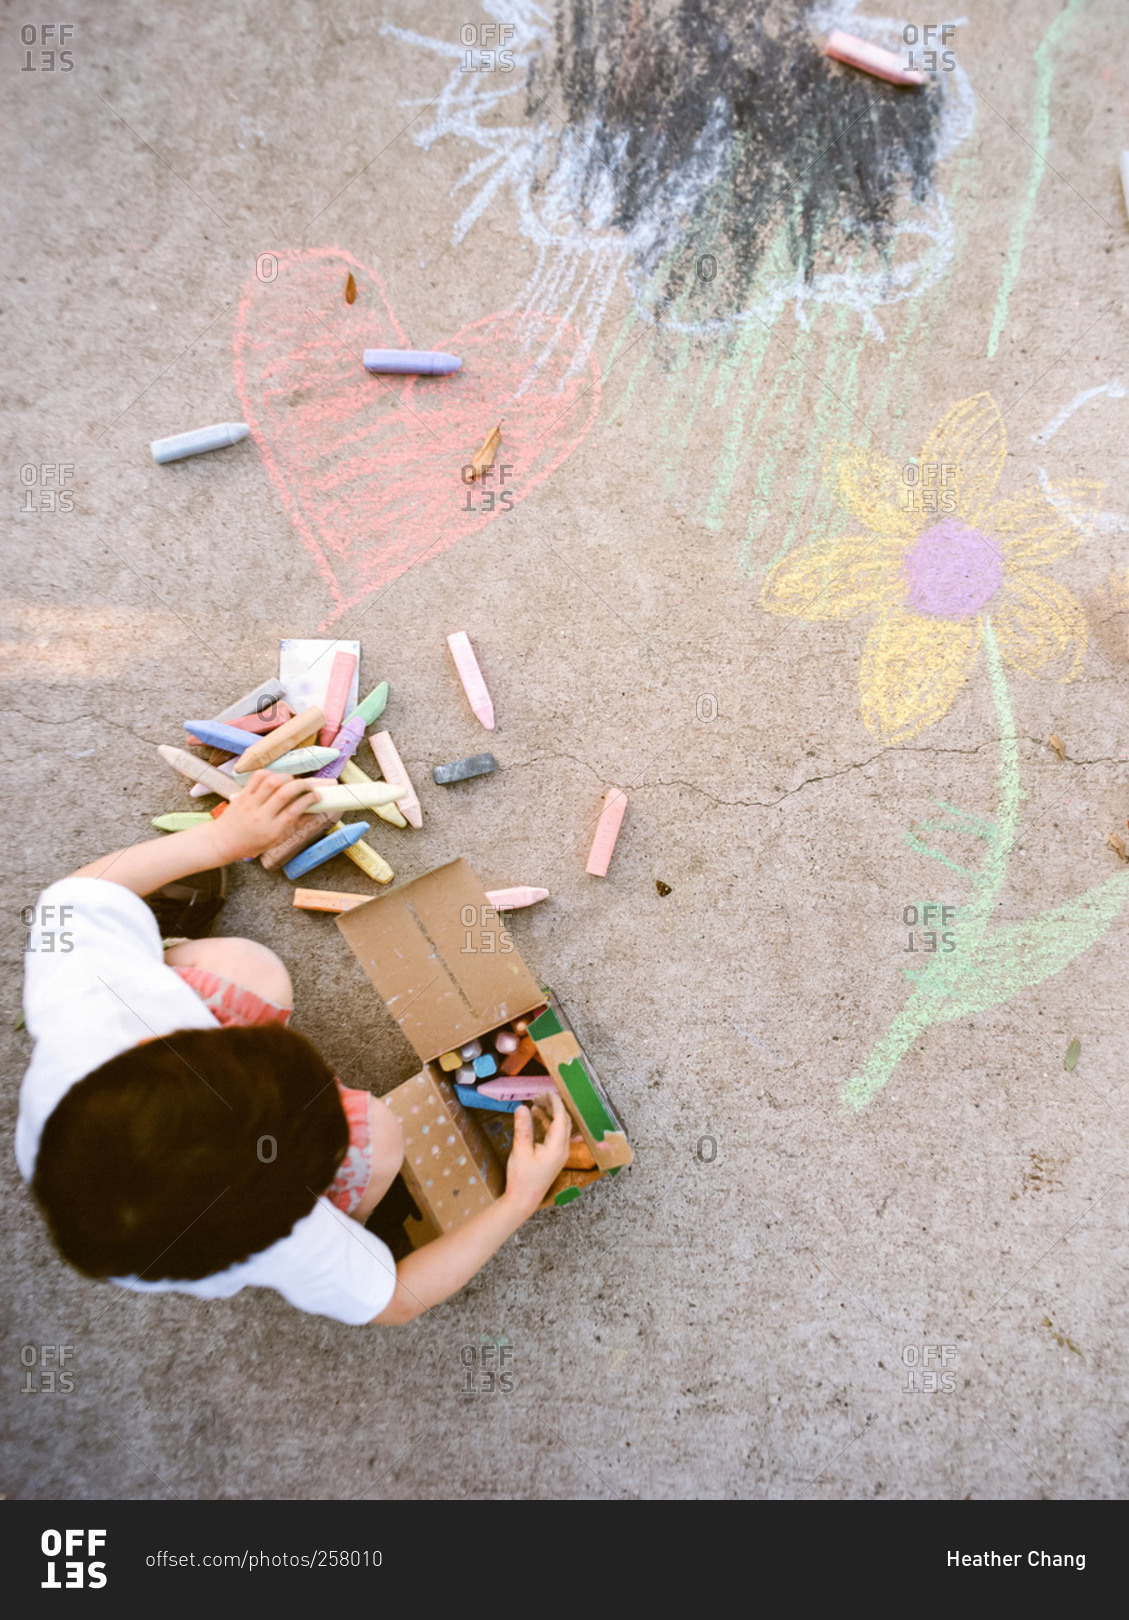 Overhead view of young boy drawing with sidewalk chalk